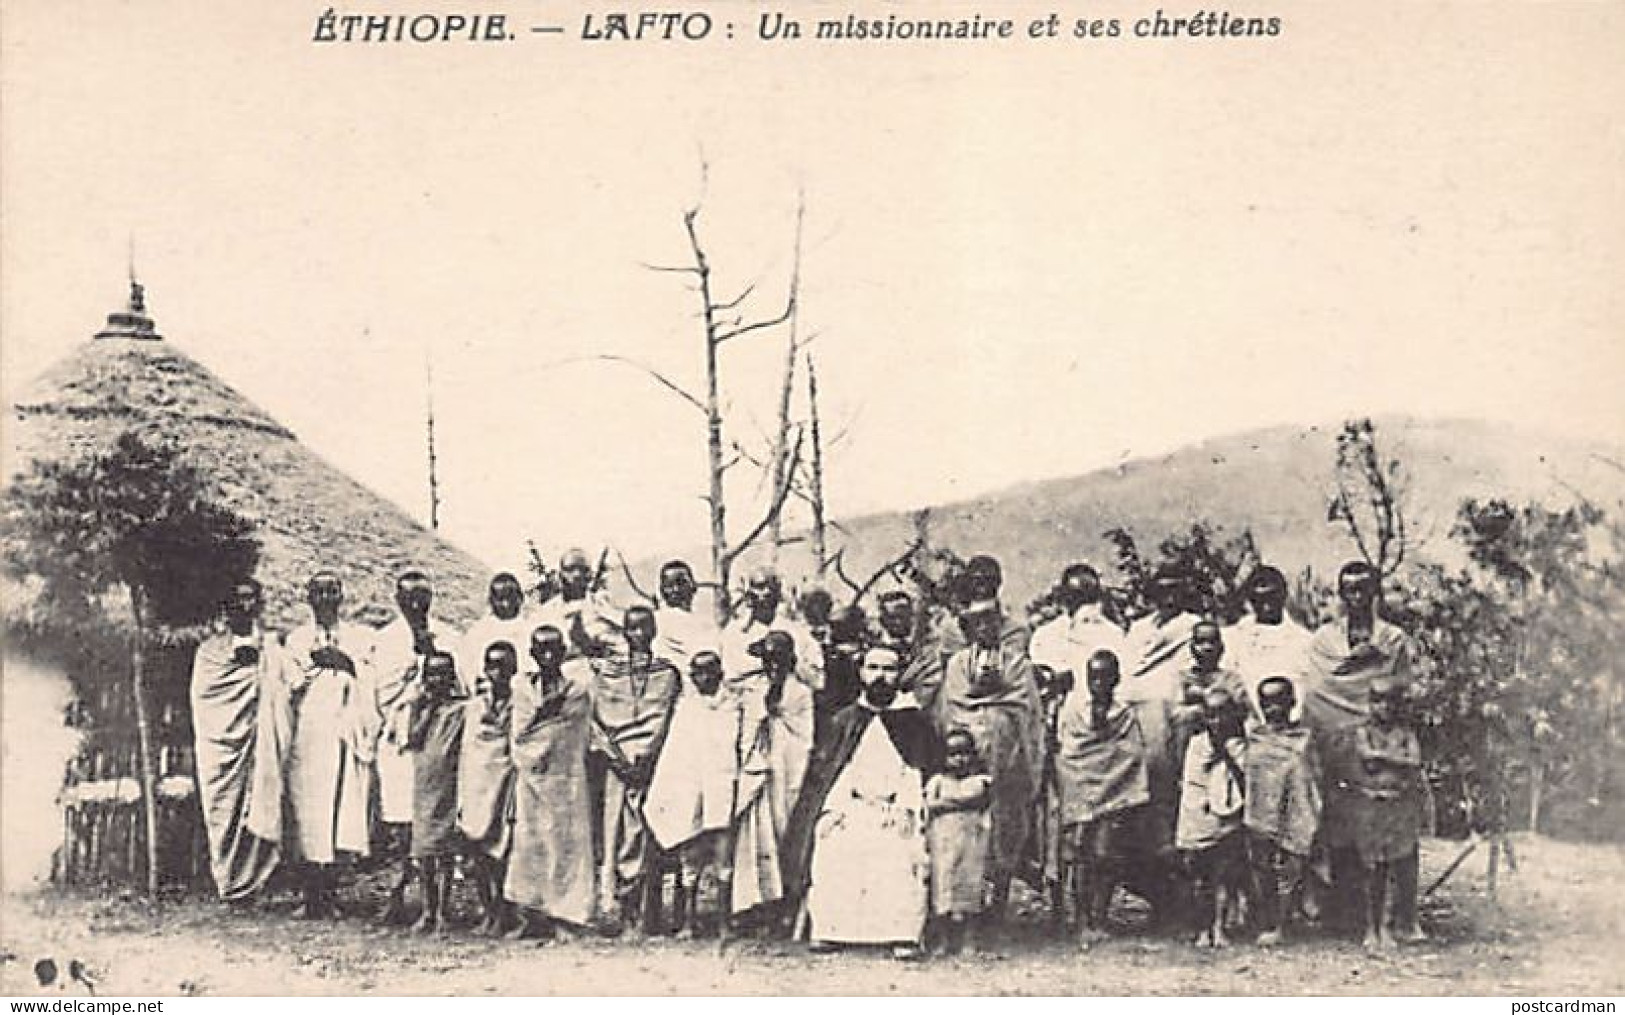 Ethiopia - LAFTO - A Missionary And His Christians - Publ. Franciscan Voices - Ethiopia